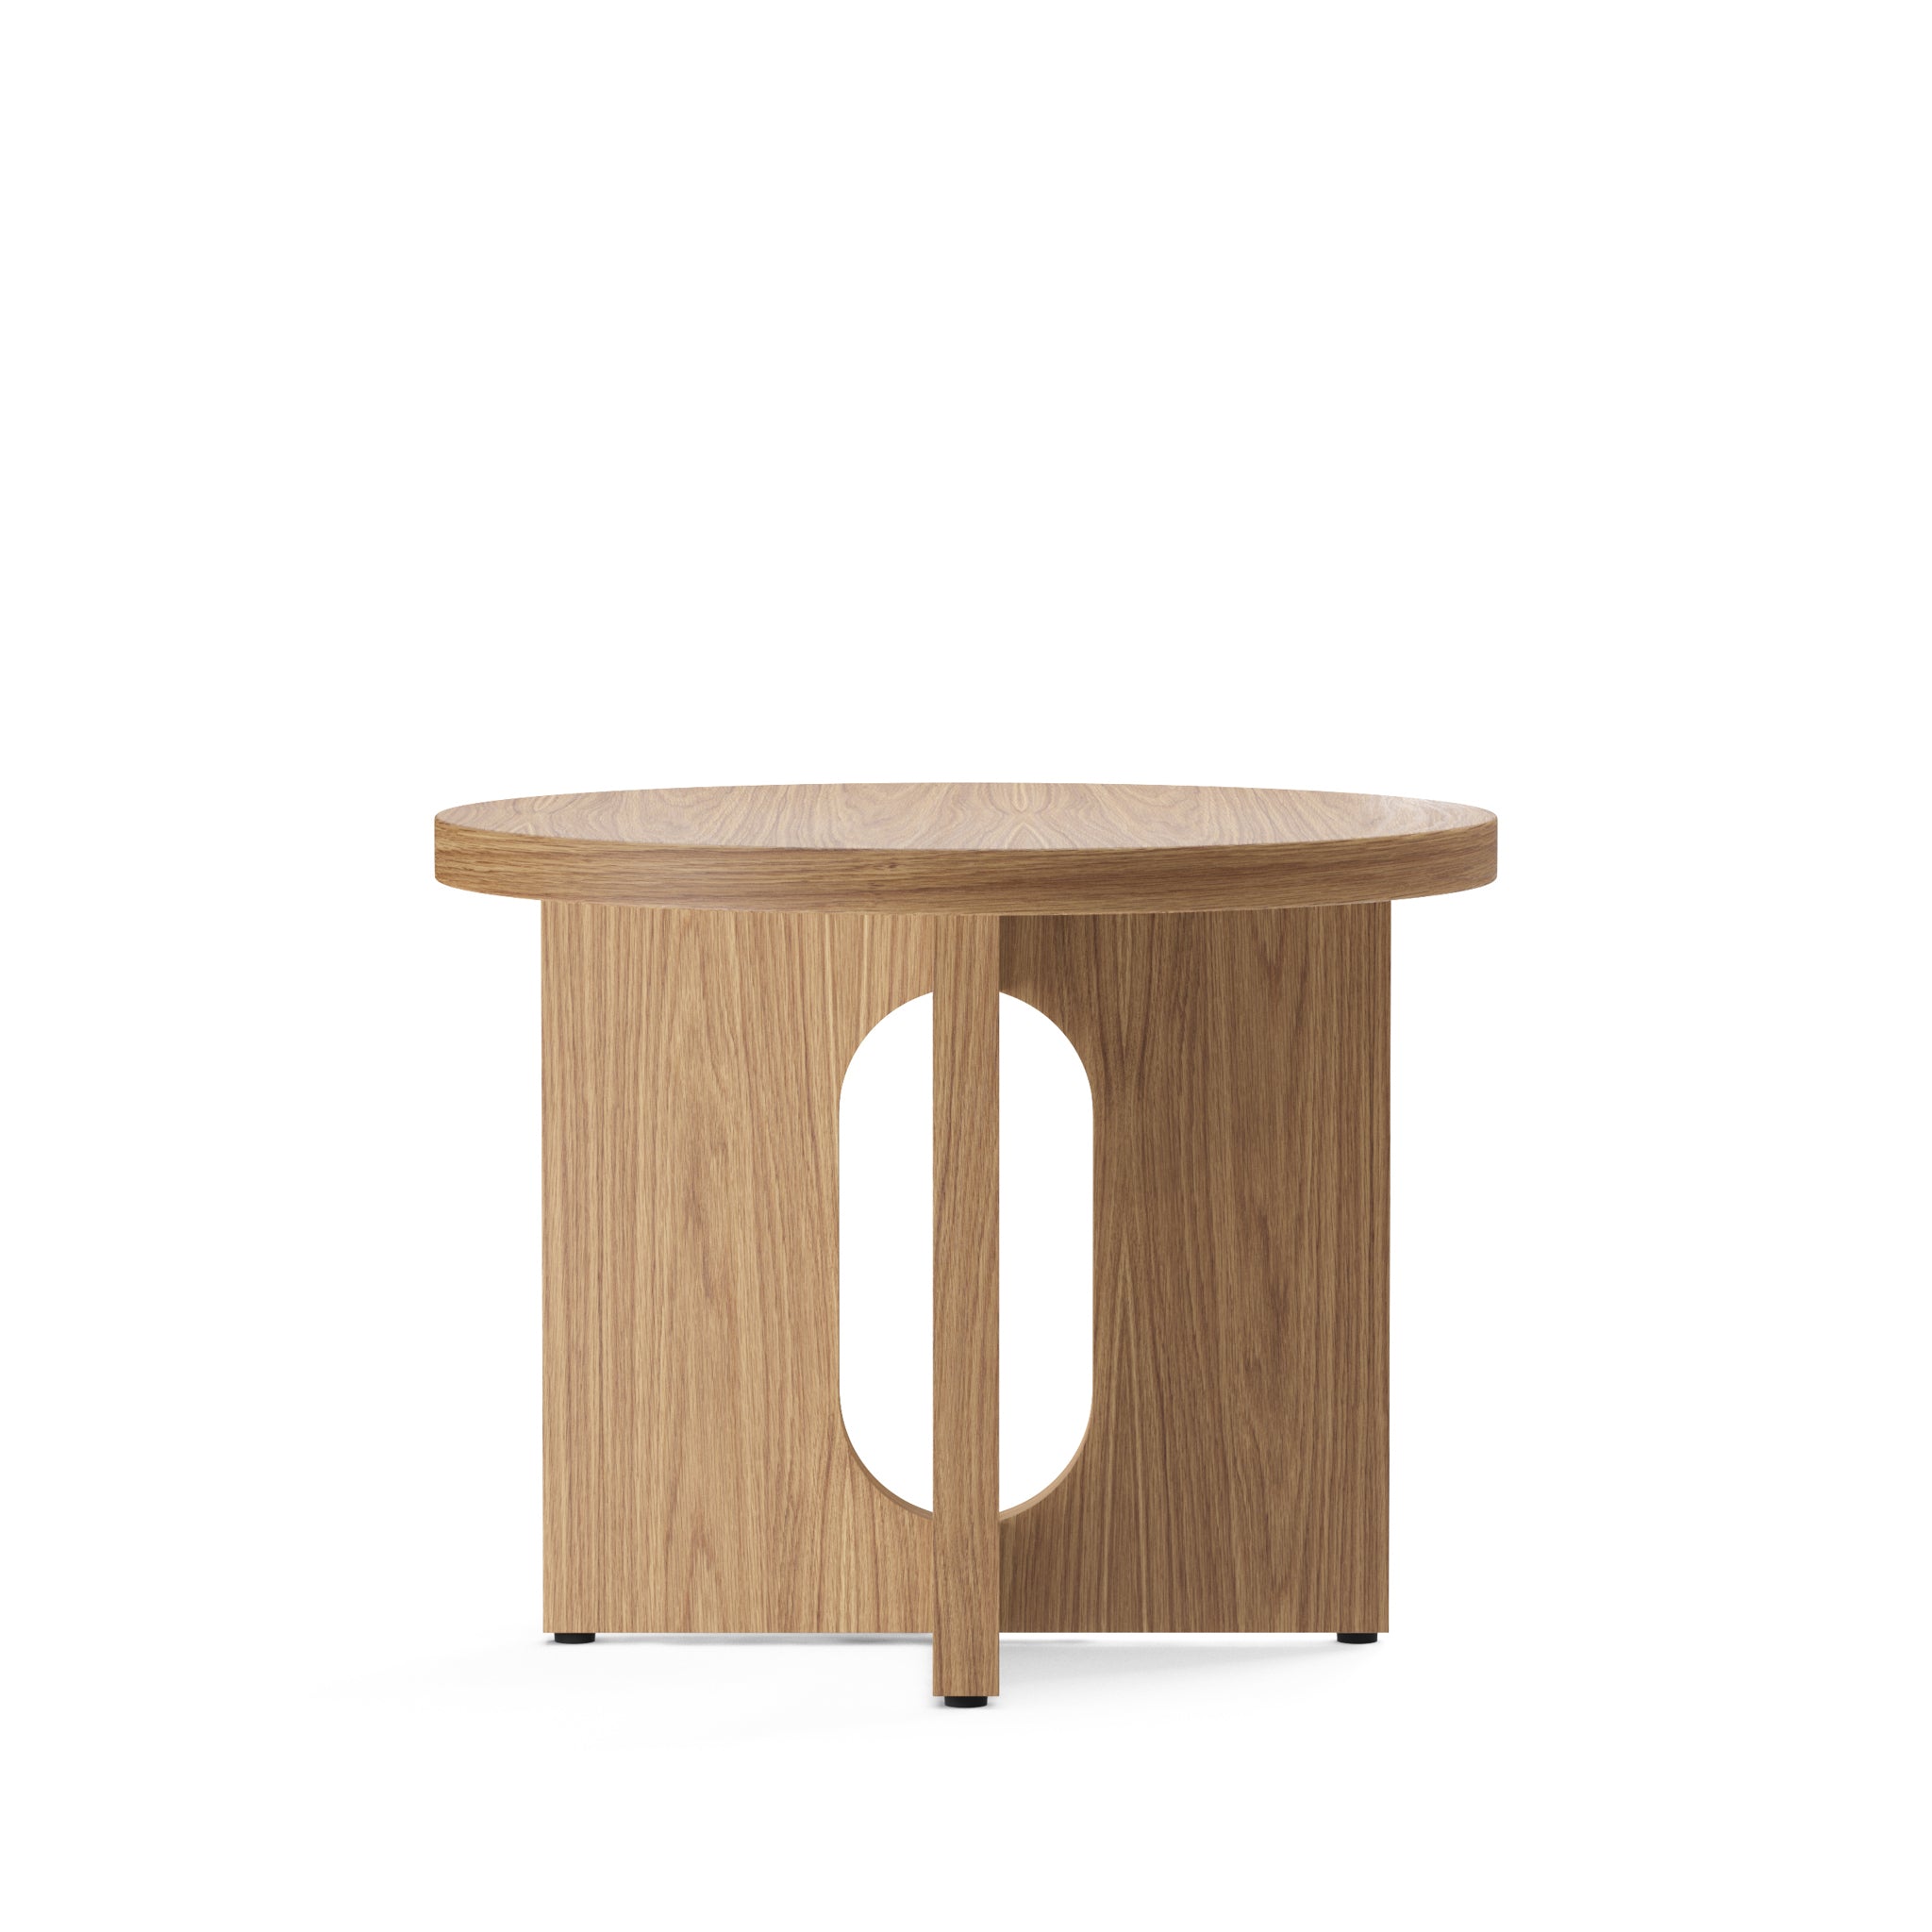 Androgyne Side Table Ø50 by Danielle Siggerud